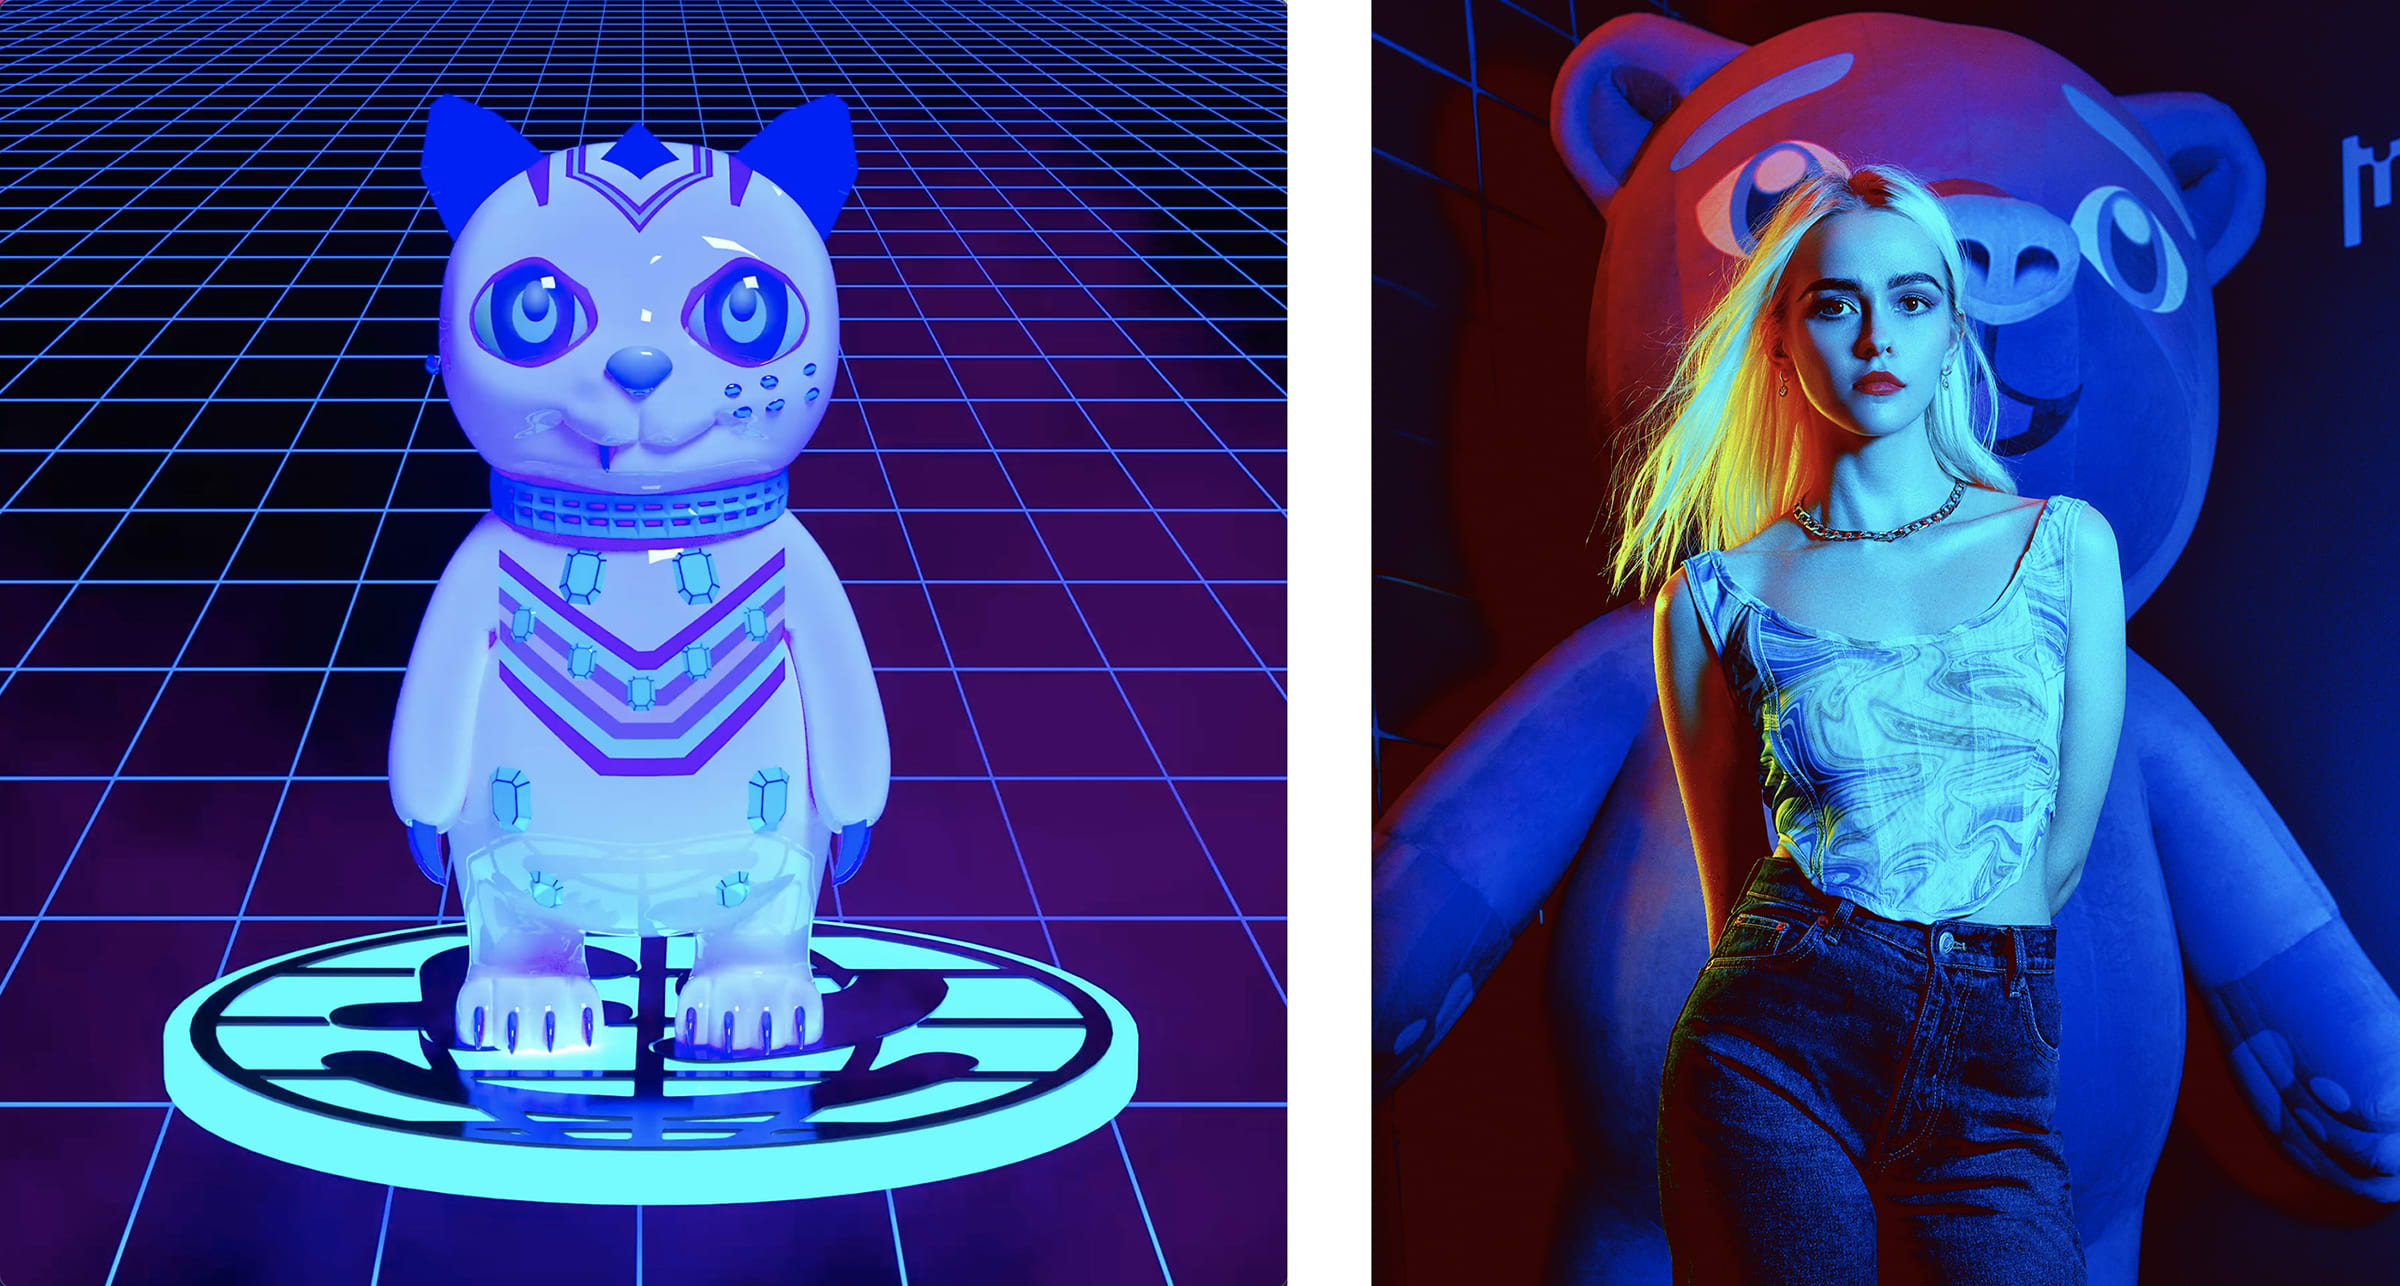 Left: Olive Allen, MetaCat, 2022. Right: Olive Allen. Photo by Dave Zuluaga. Both images courtesy of the artist.